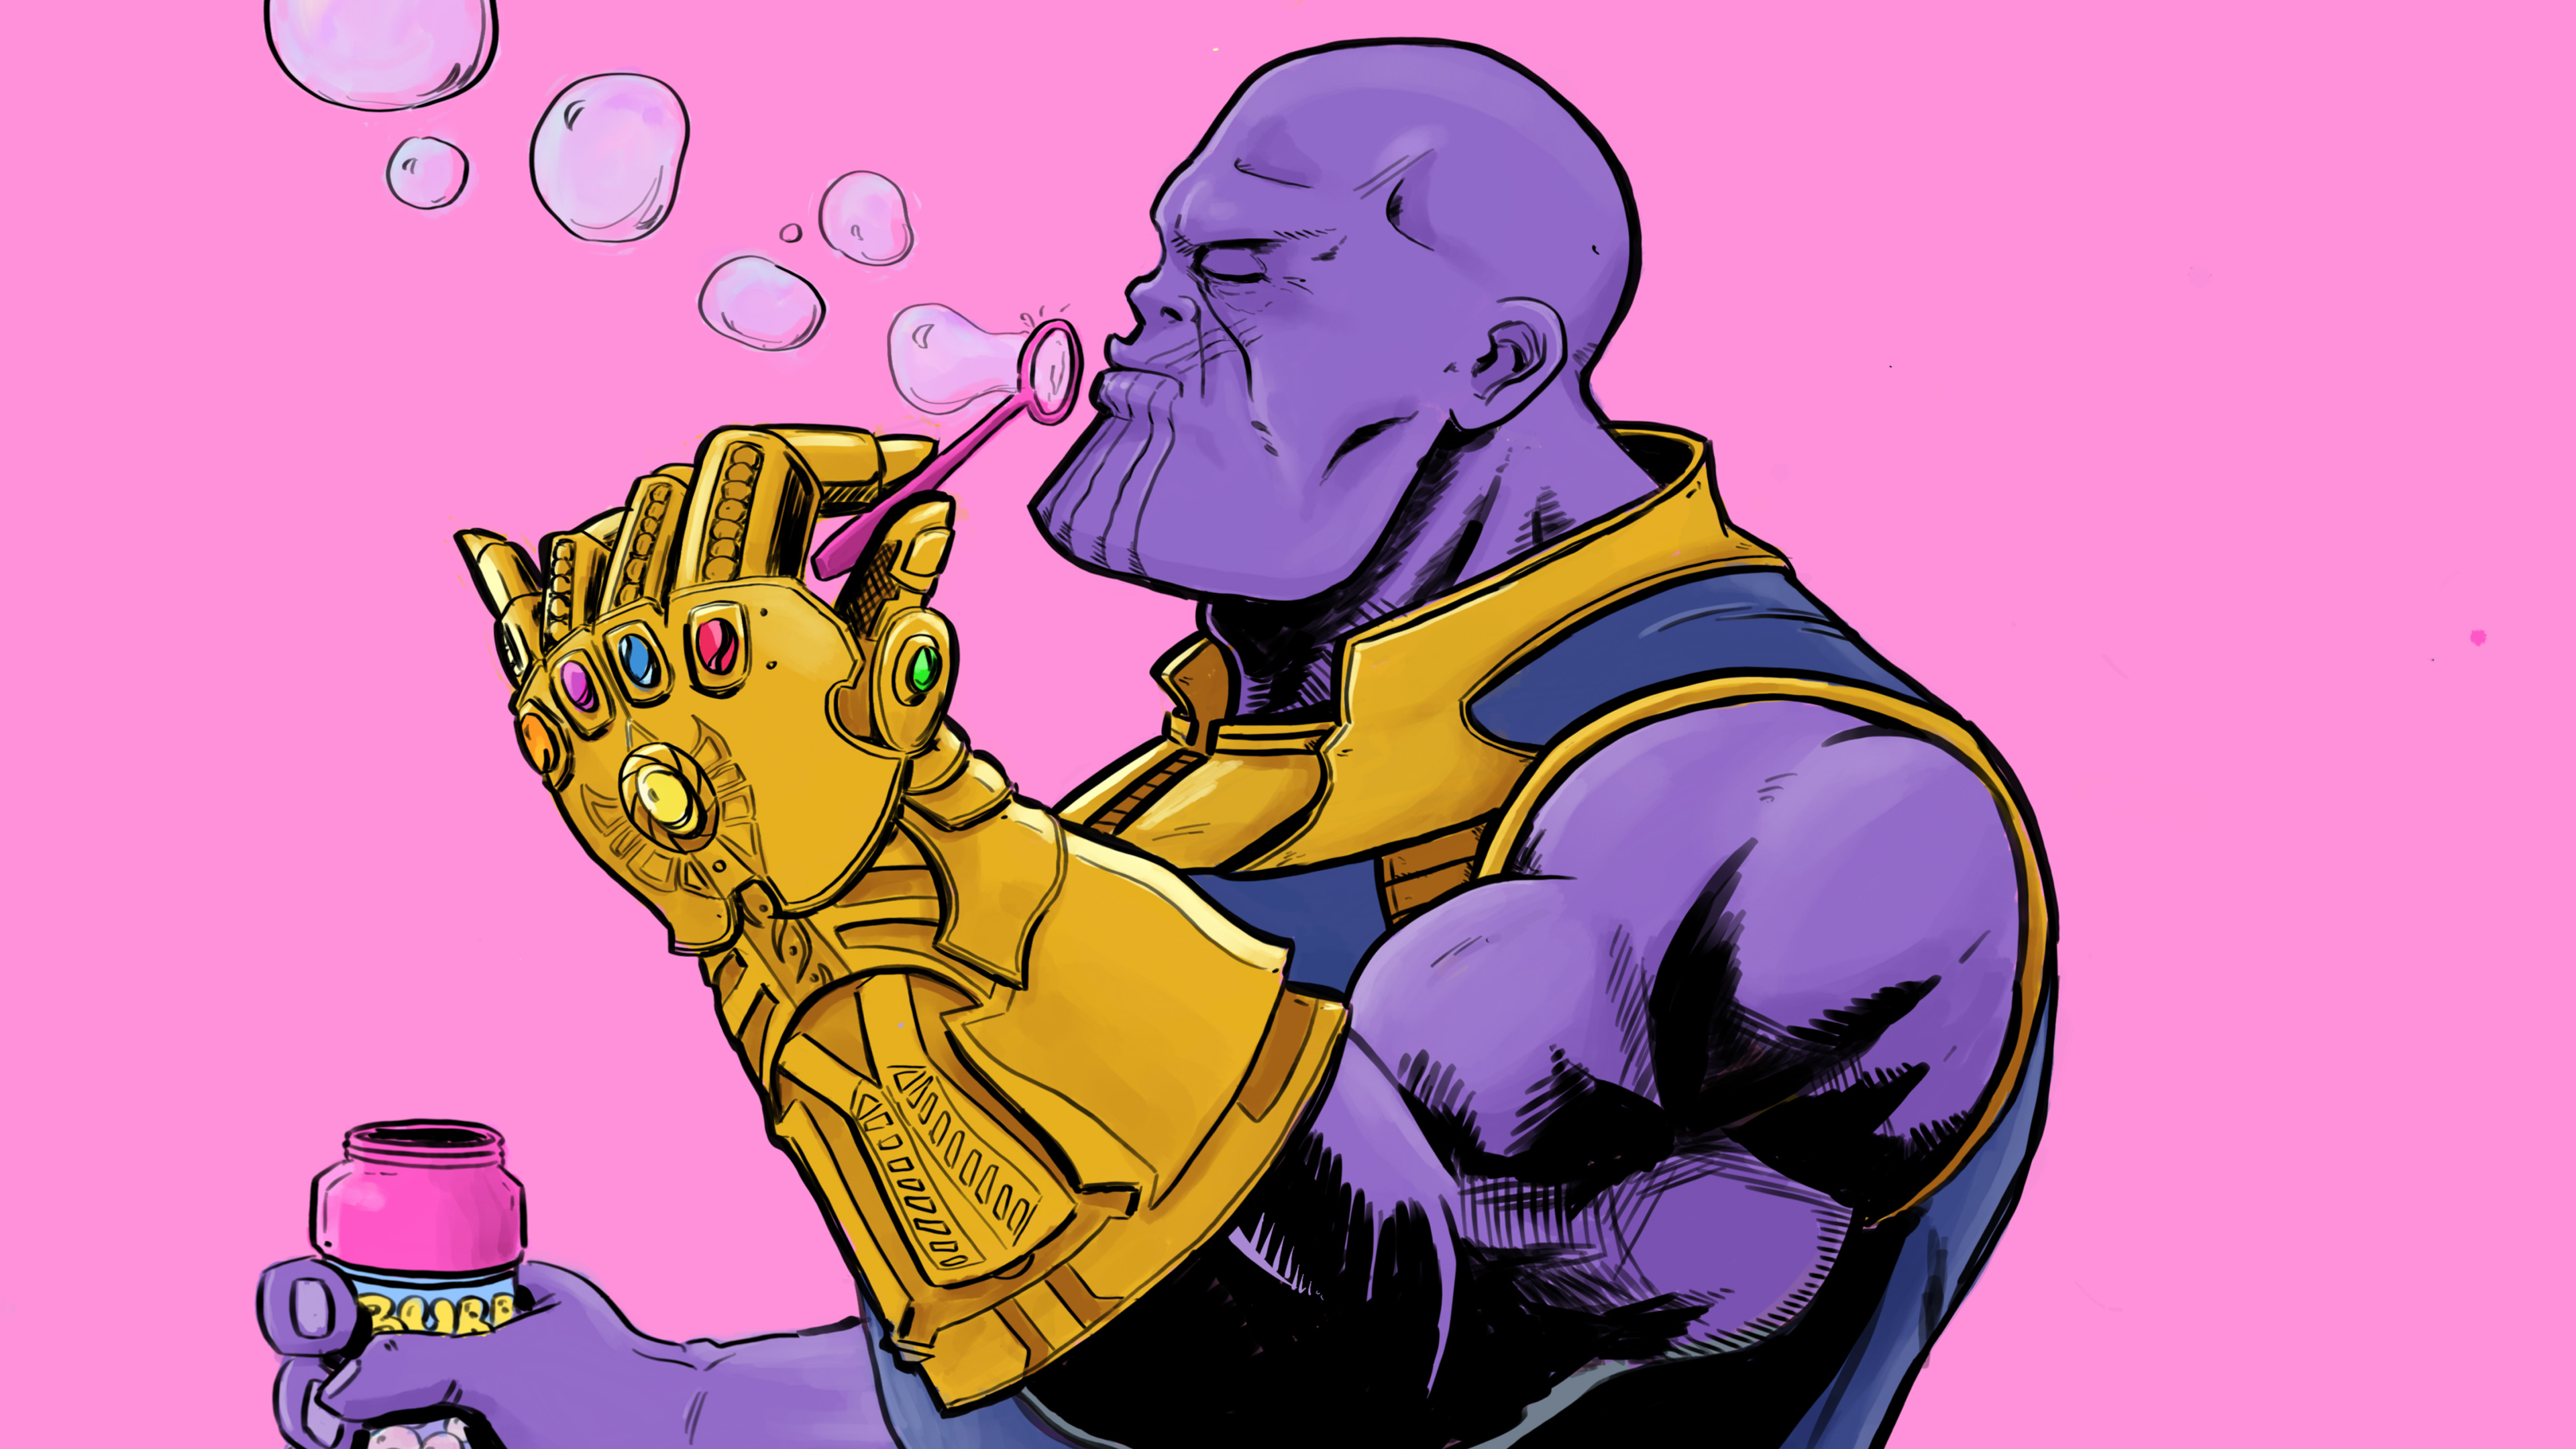 Thanos Blowing Bubbles - Funny Thanos - HD Wallpaper 